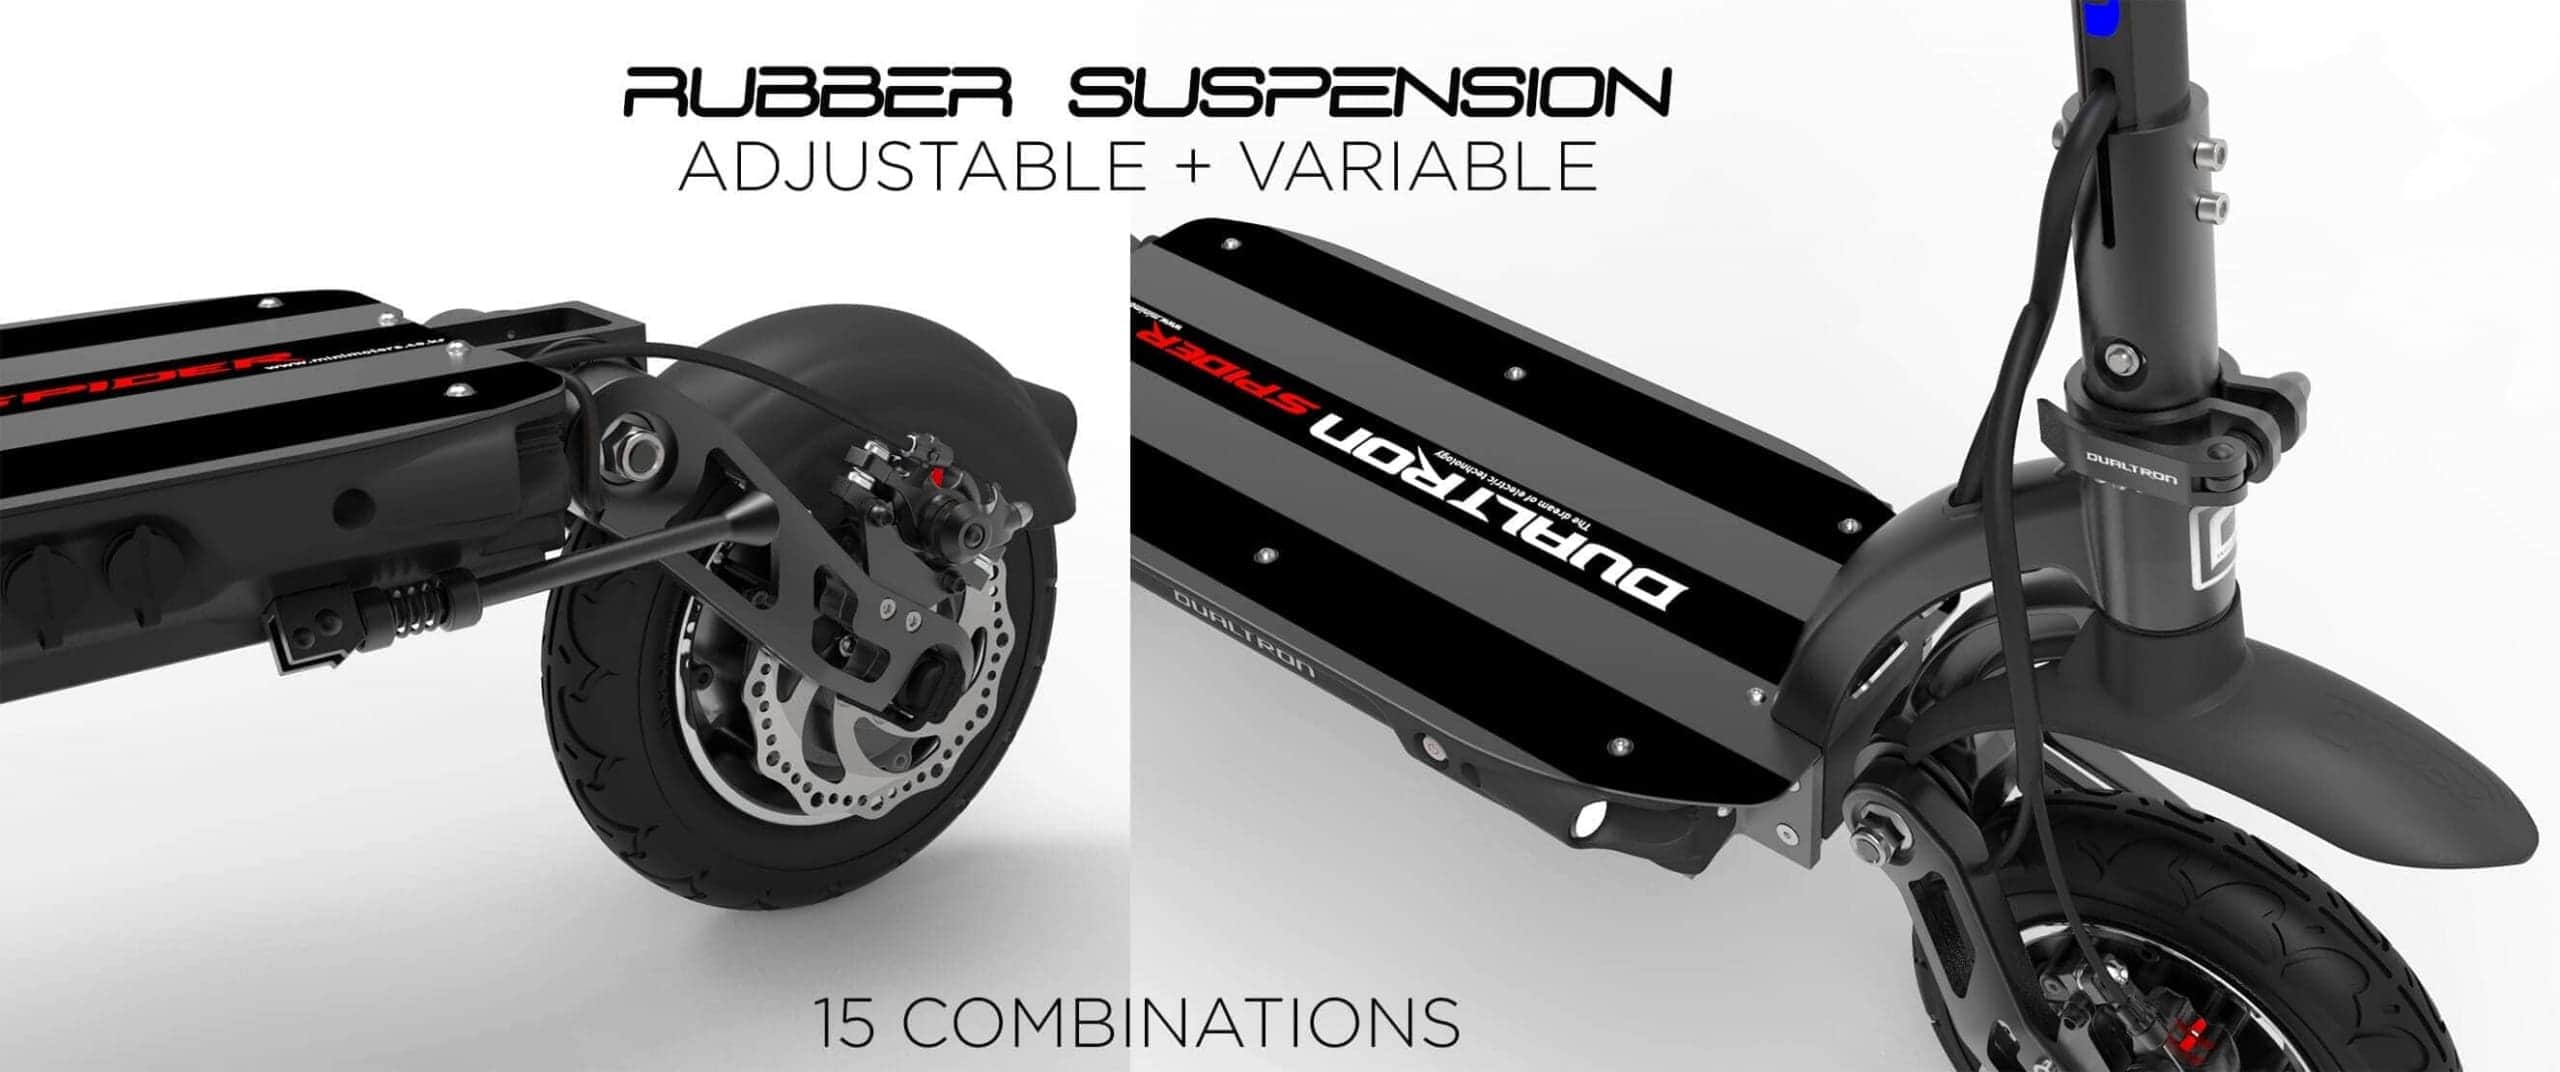 DUALTRON SPIDER UL2272 certified high performance e-scooter rubber suspension